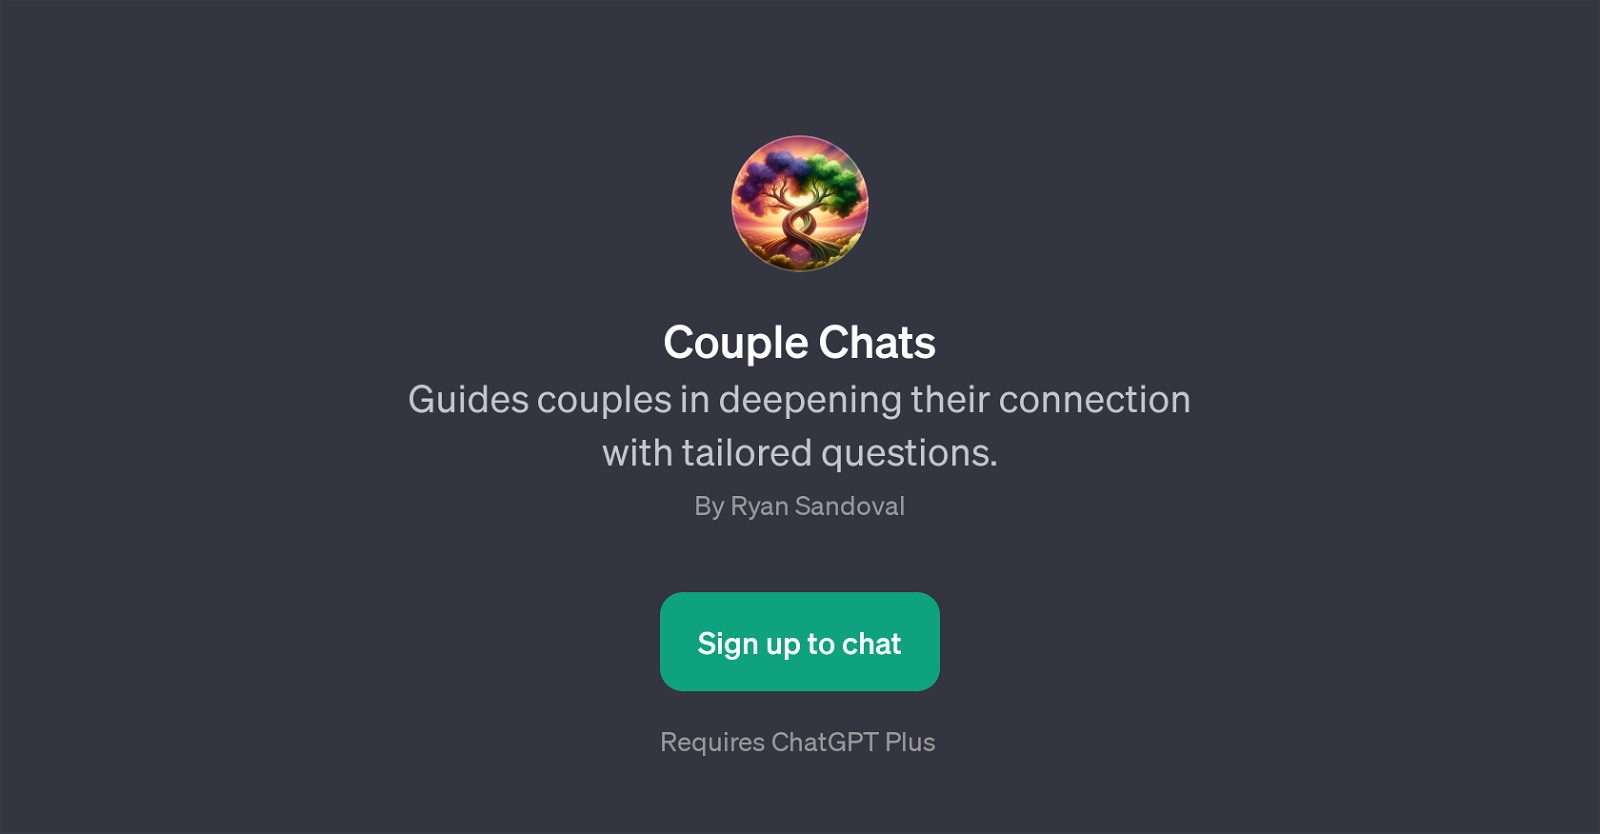 Couple Chats website